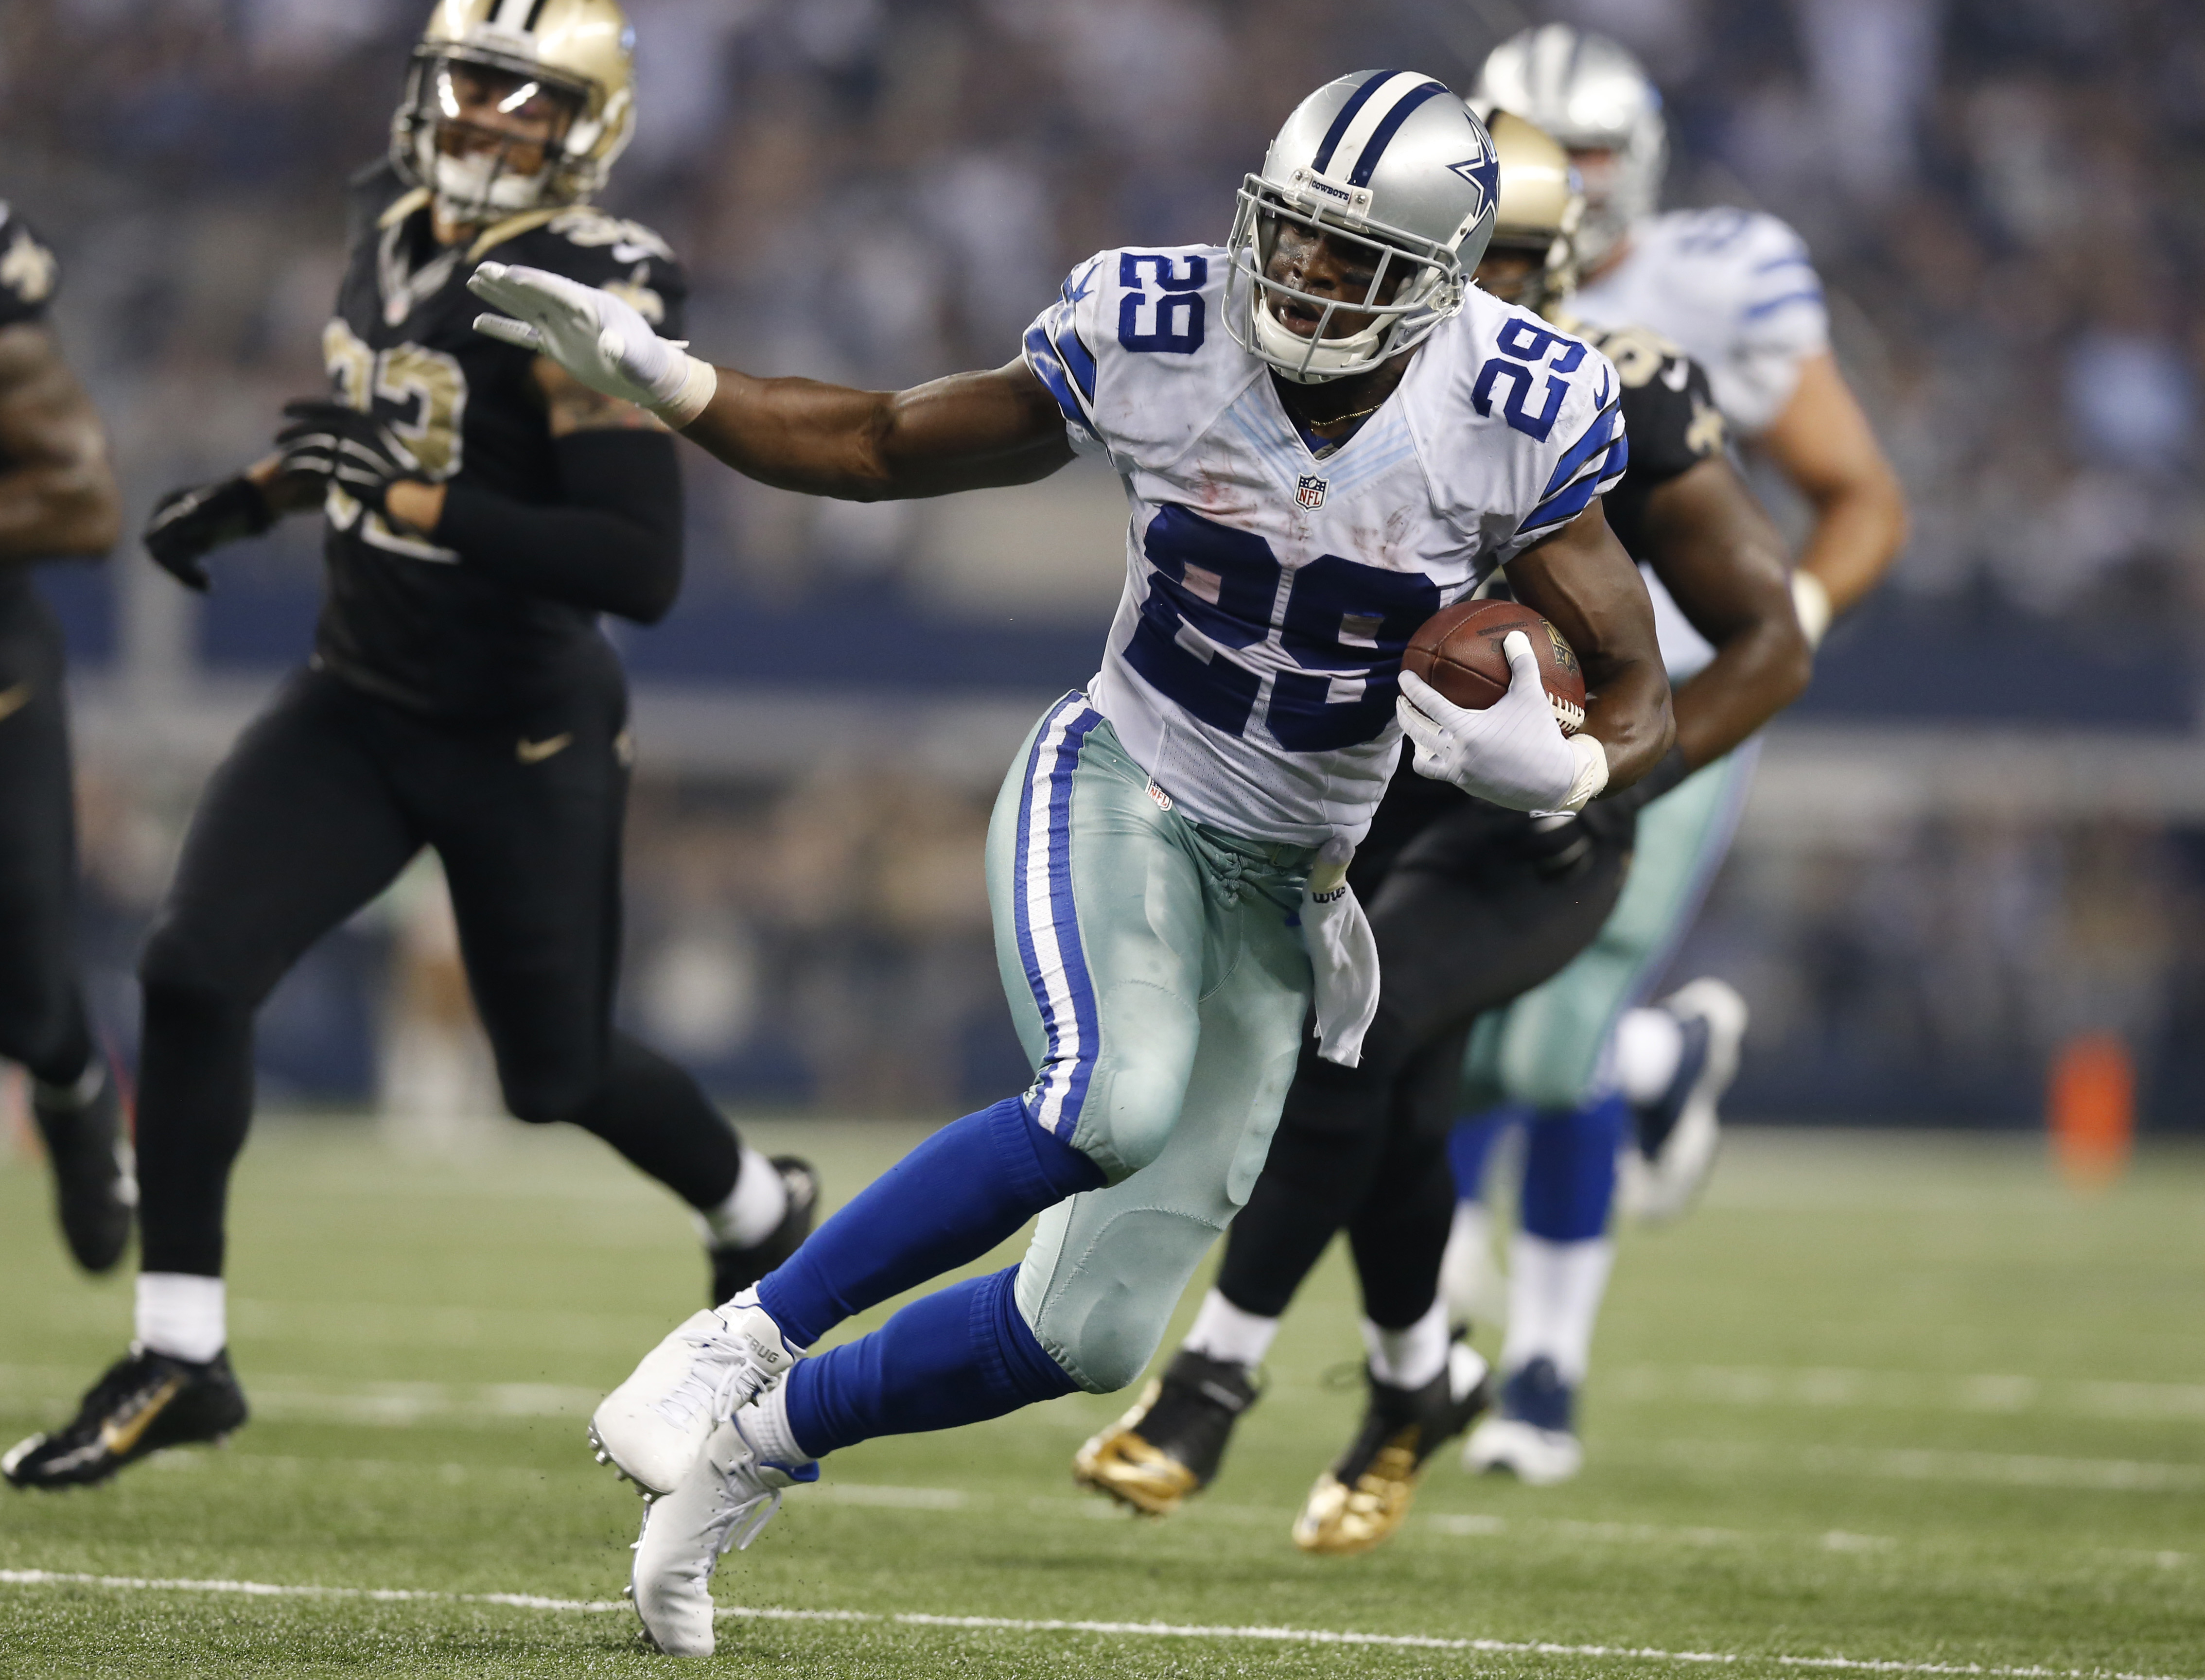 Sep 28, 2014; Arlington, TX, USA; Dallas Cowboys running back DeMarco Murray (29) runs with the ball for a third quarter touchdown against the New Orleans Saints at AT&T Stadium. (Matthew Emmons-USA TODAY Sports)